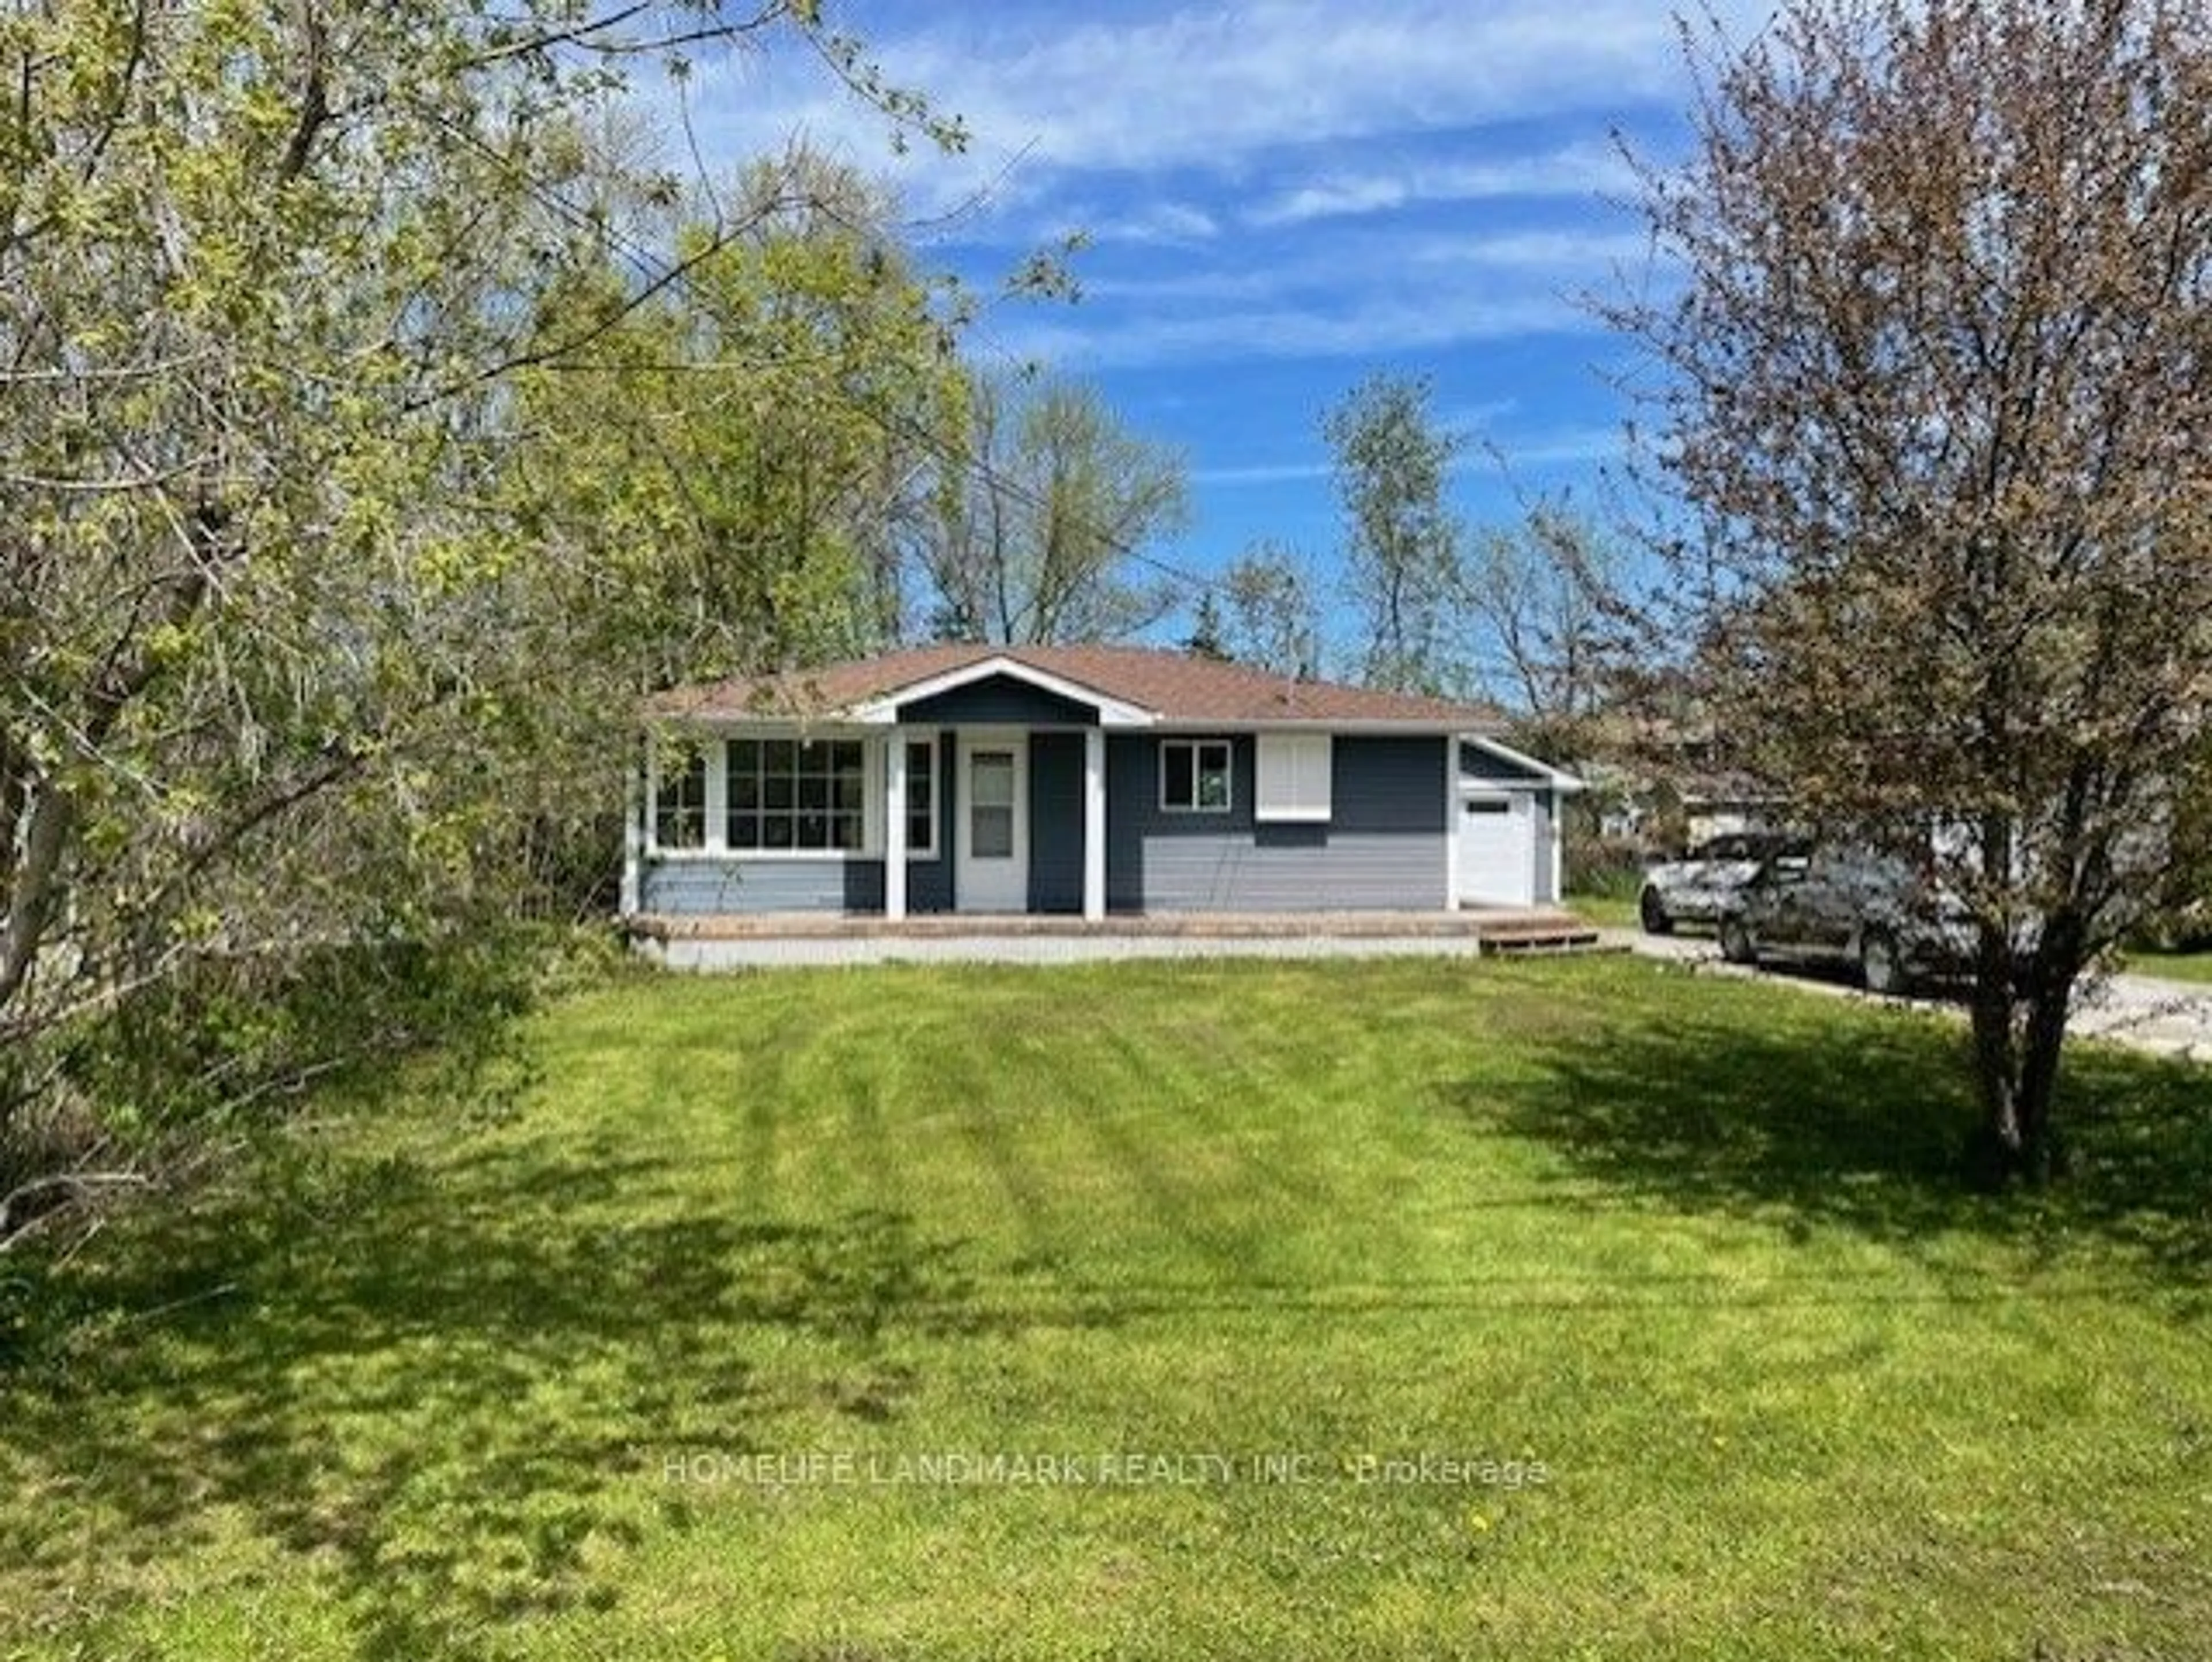 Frontside or backside of a home for 372 Irene Dr, Georgina Ontario L4P 3B2